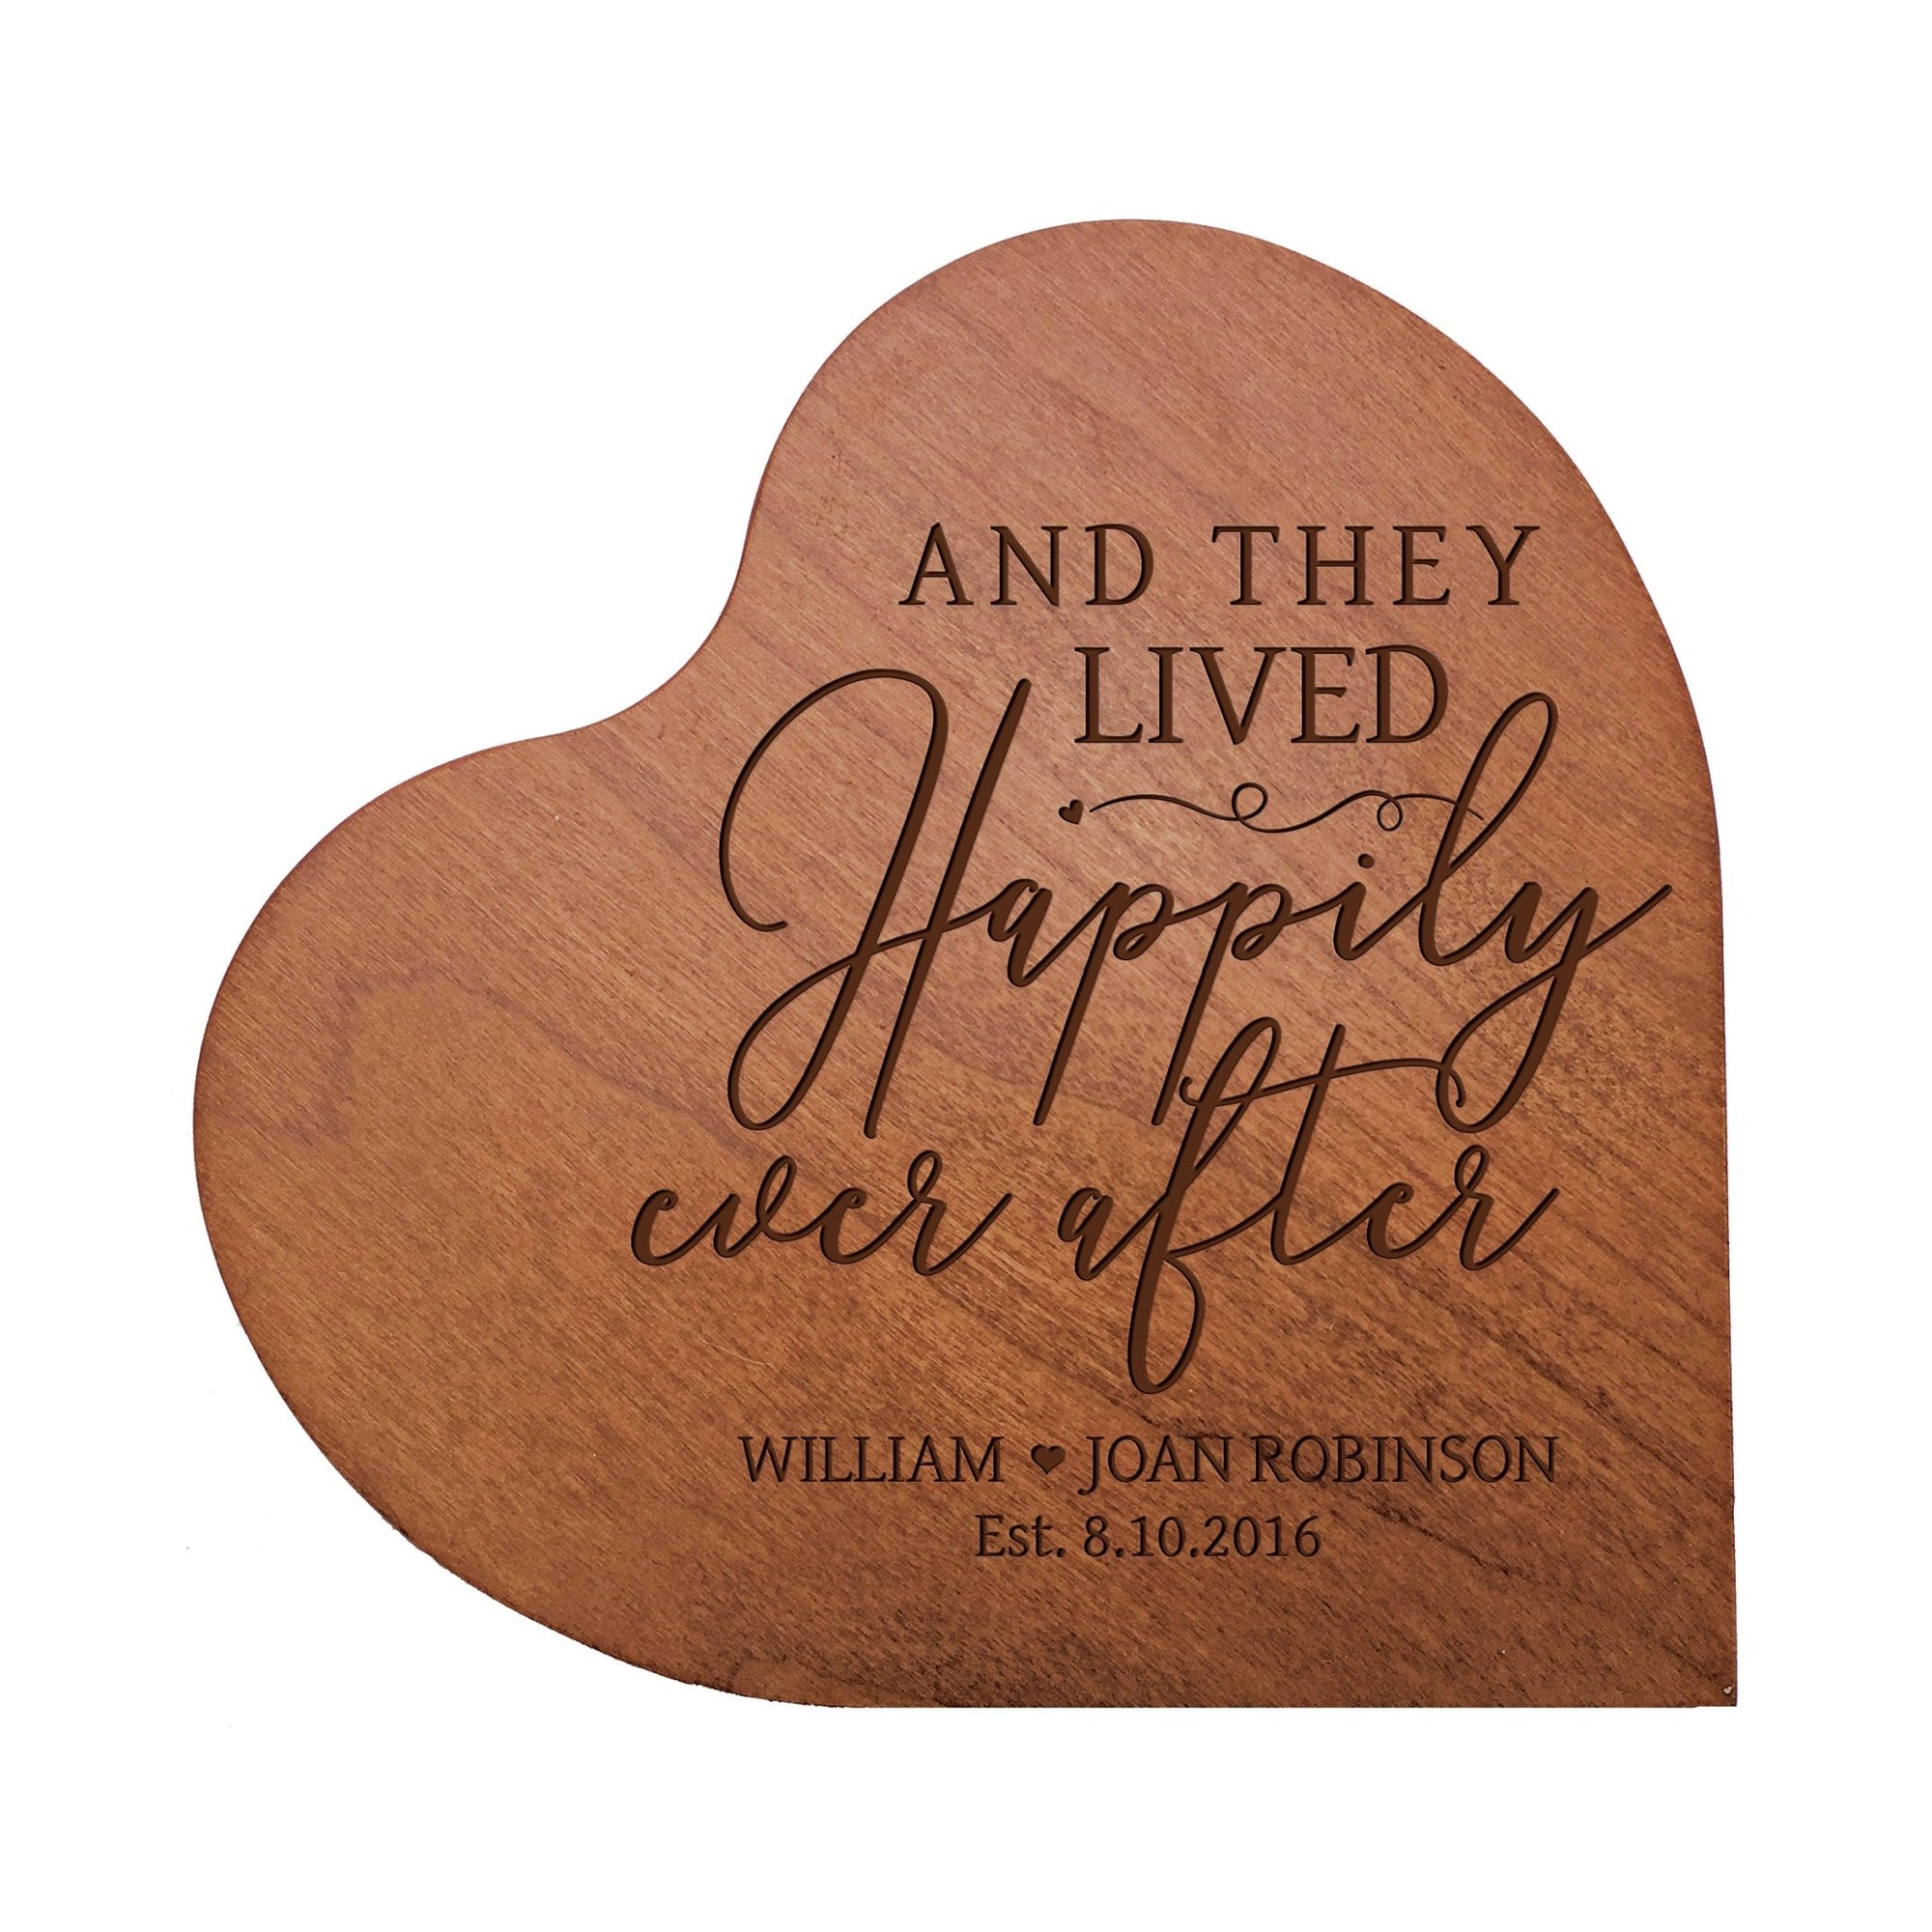 Personalized Engraved Wooden Inspirational Heart Block 5” x 5.25” x 0.75” - And They Lived Happily - LifeSong Milestones